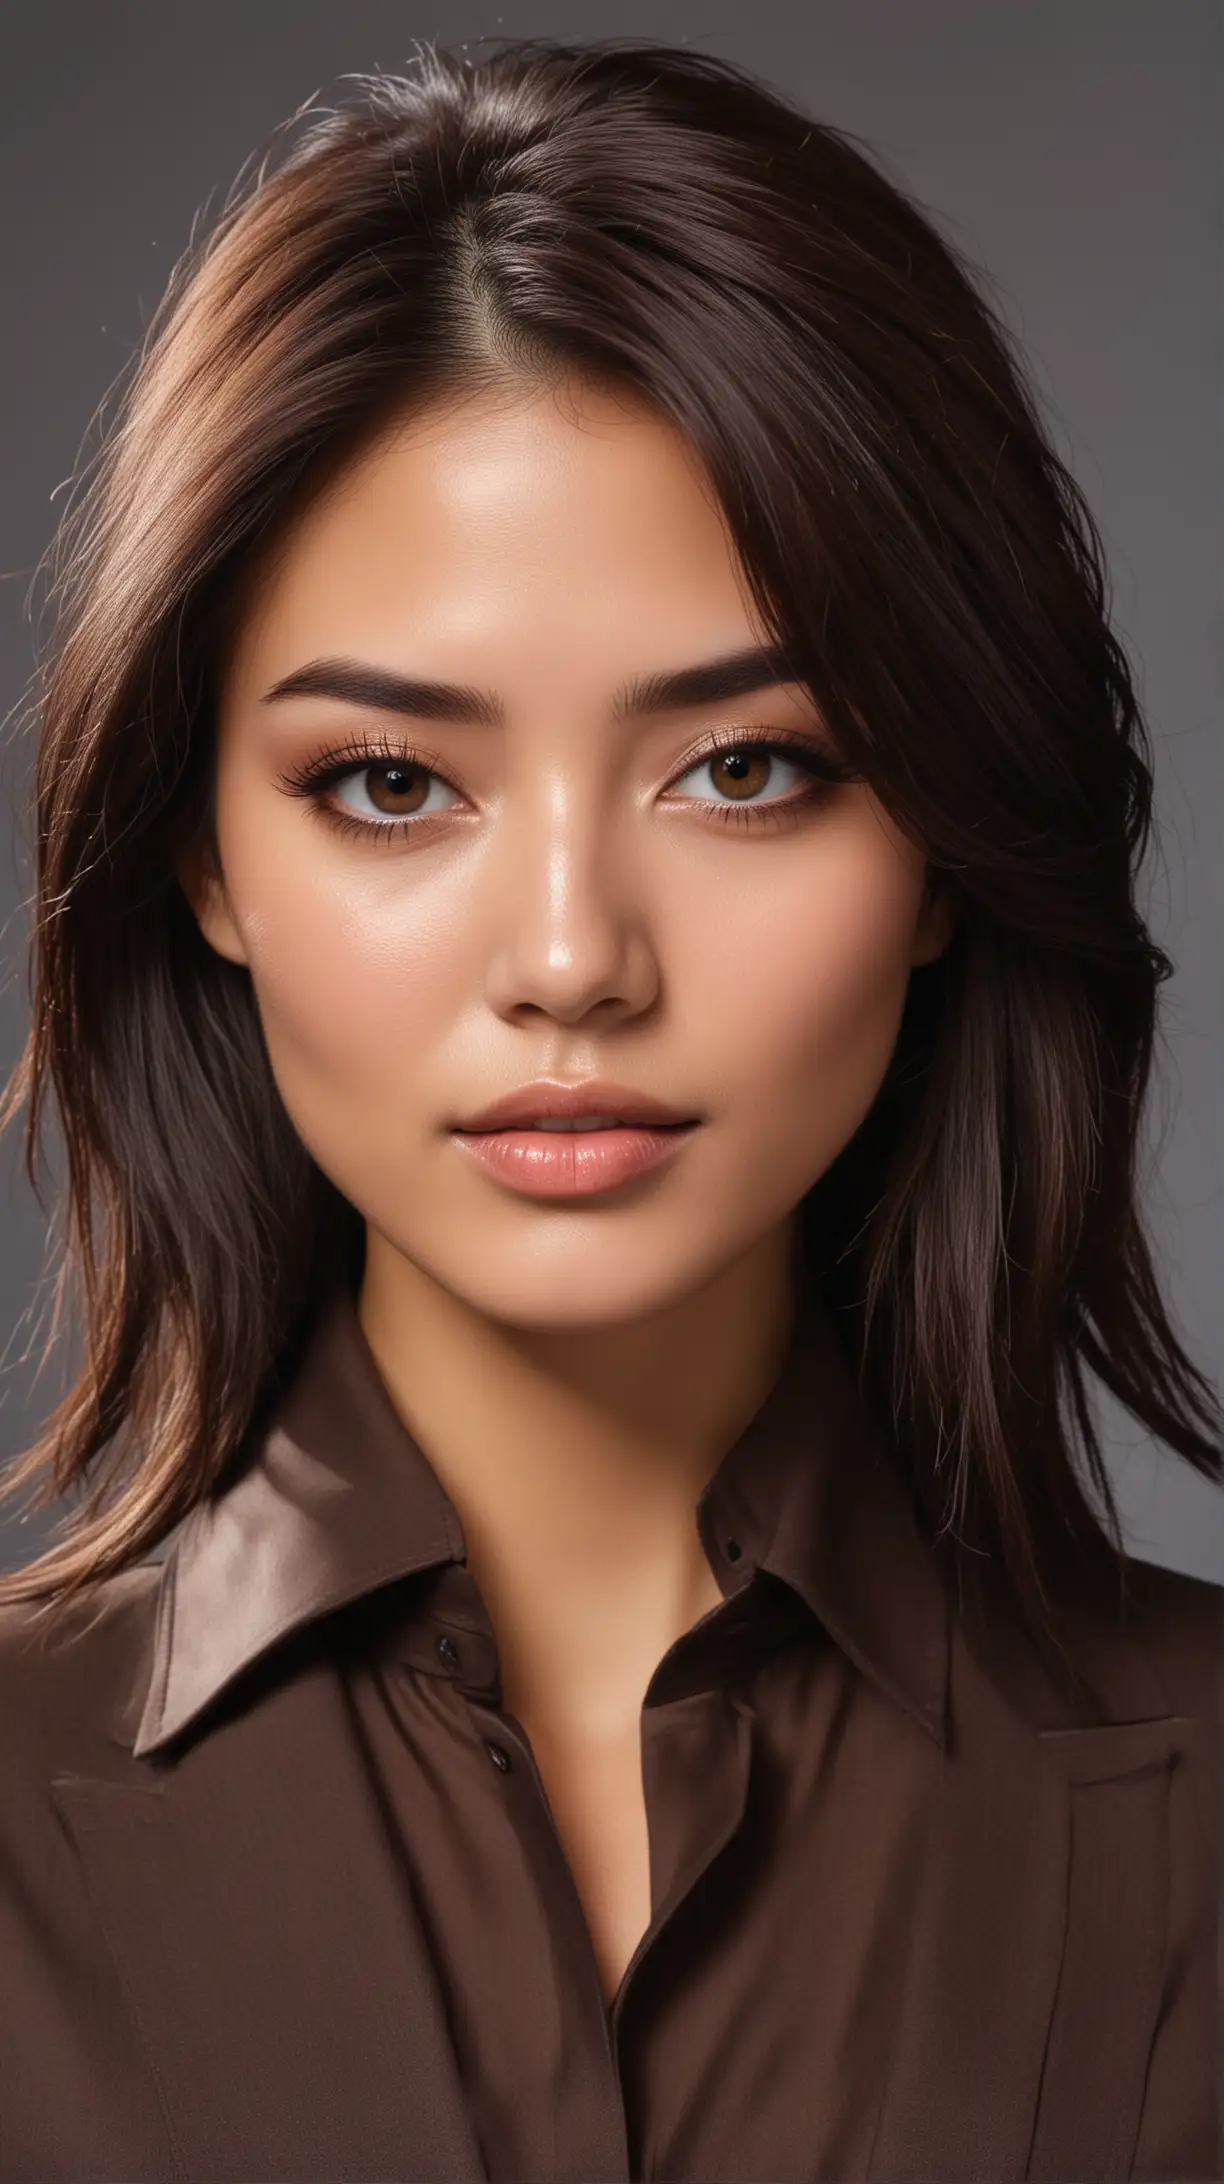 Beautiful female model without freckles, hairstyle - Asian elegance in rich chocolate layers, chocolate brown hair color, dark eyes, oval face, age 30, professional suit